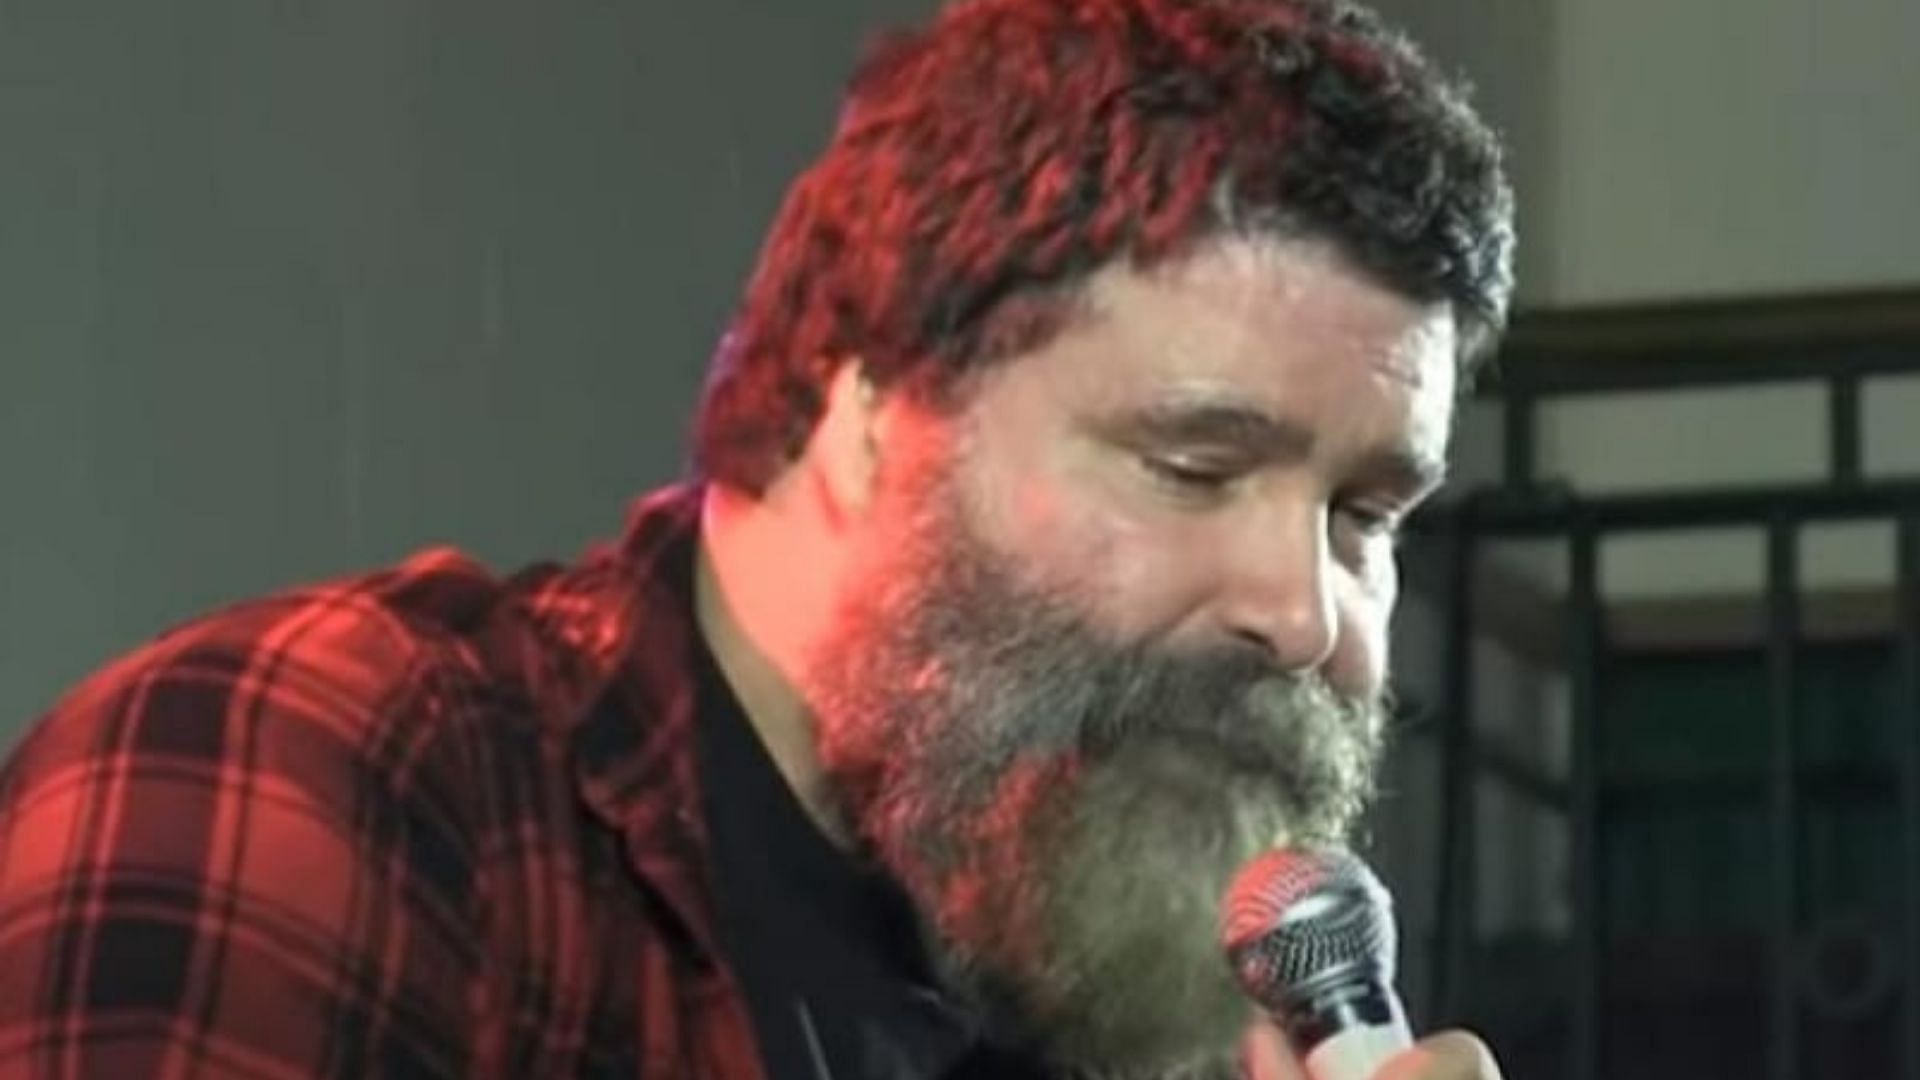 Mick Foley has always been an important part of WWE